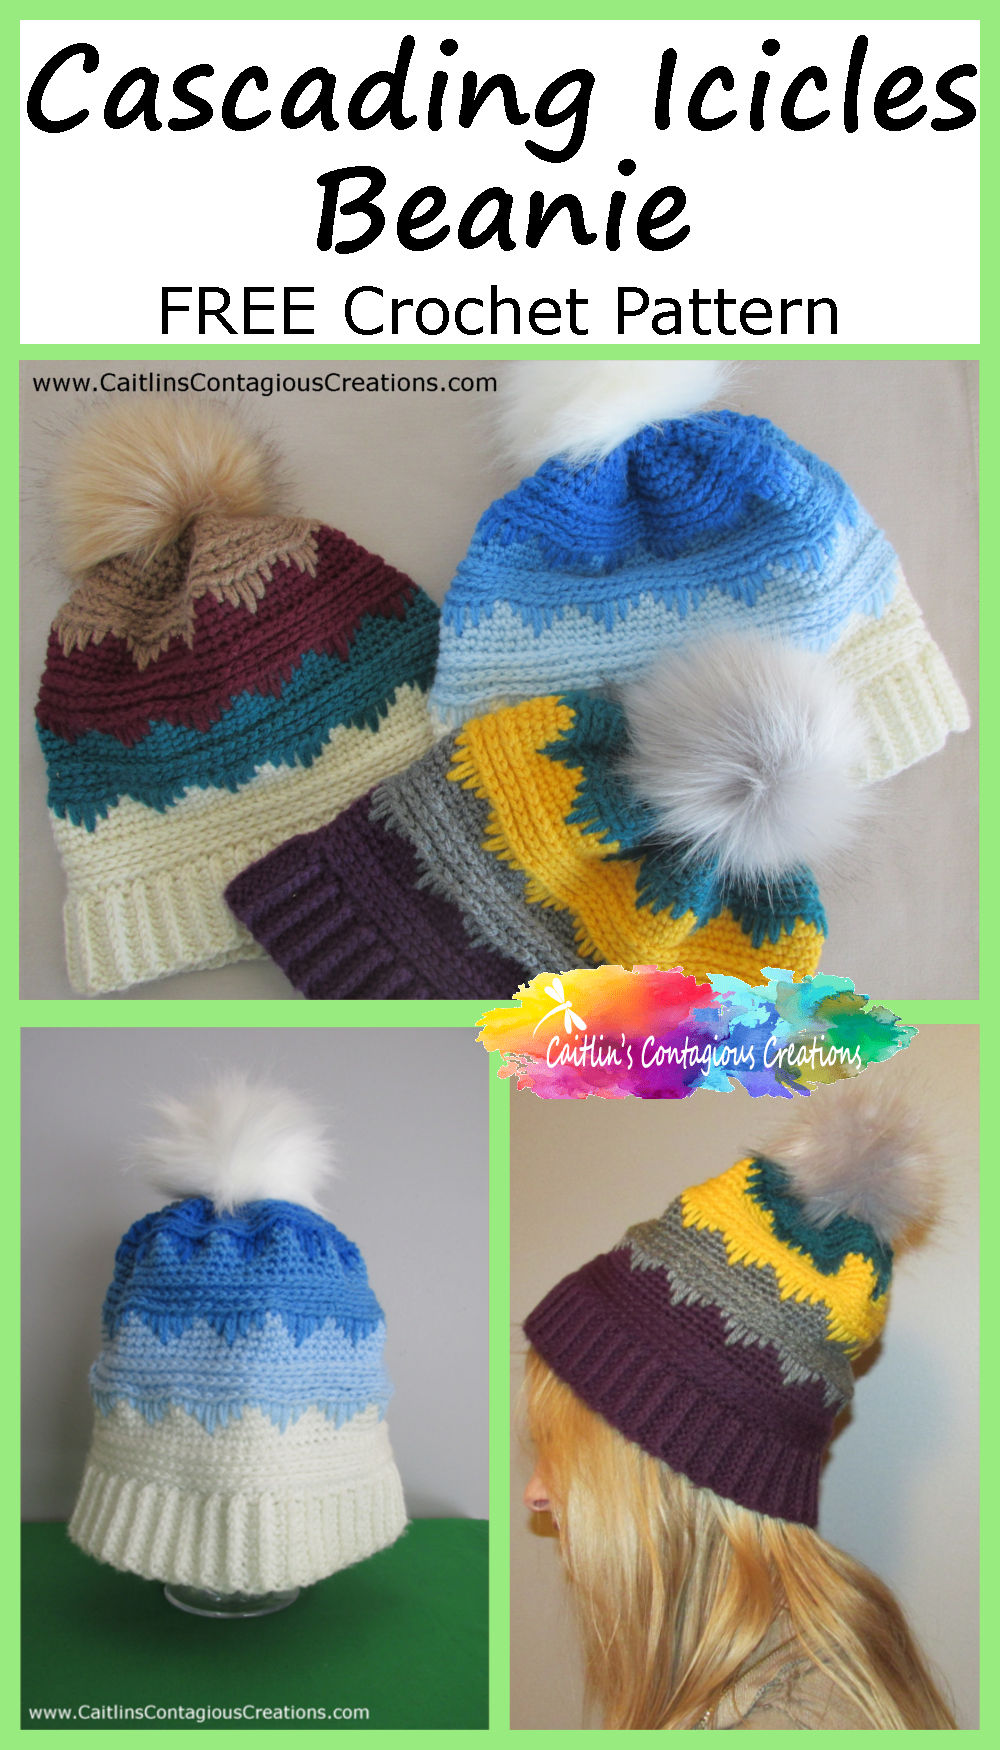 This free and easy crochet pattern from Caitlin's Contagious Creations is the Cascading Icicles Beanie. It's an easy level pattern with written instructions and lots of photos to make 3 adult sizes. The directions include options for a full winter cap or a messy bun ponytail style hat. Start yours now!